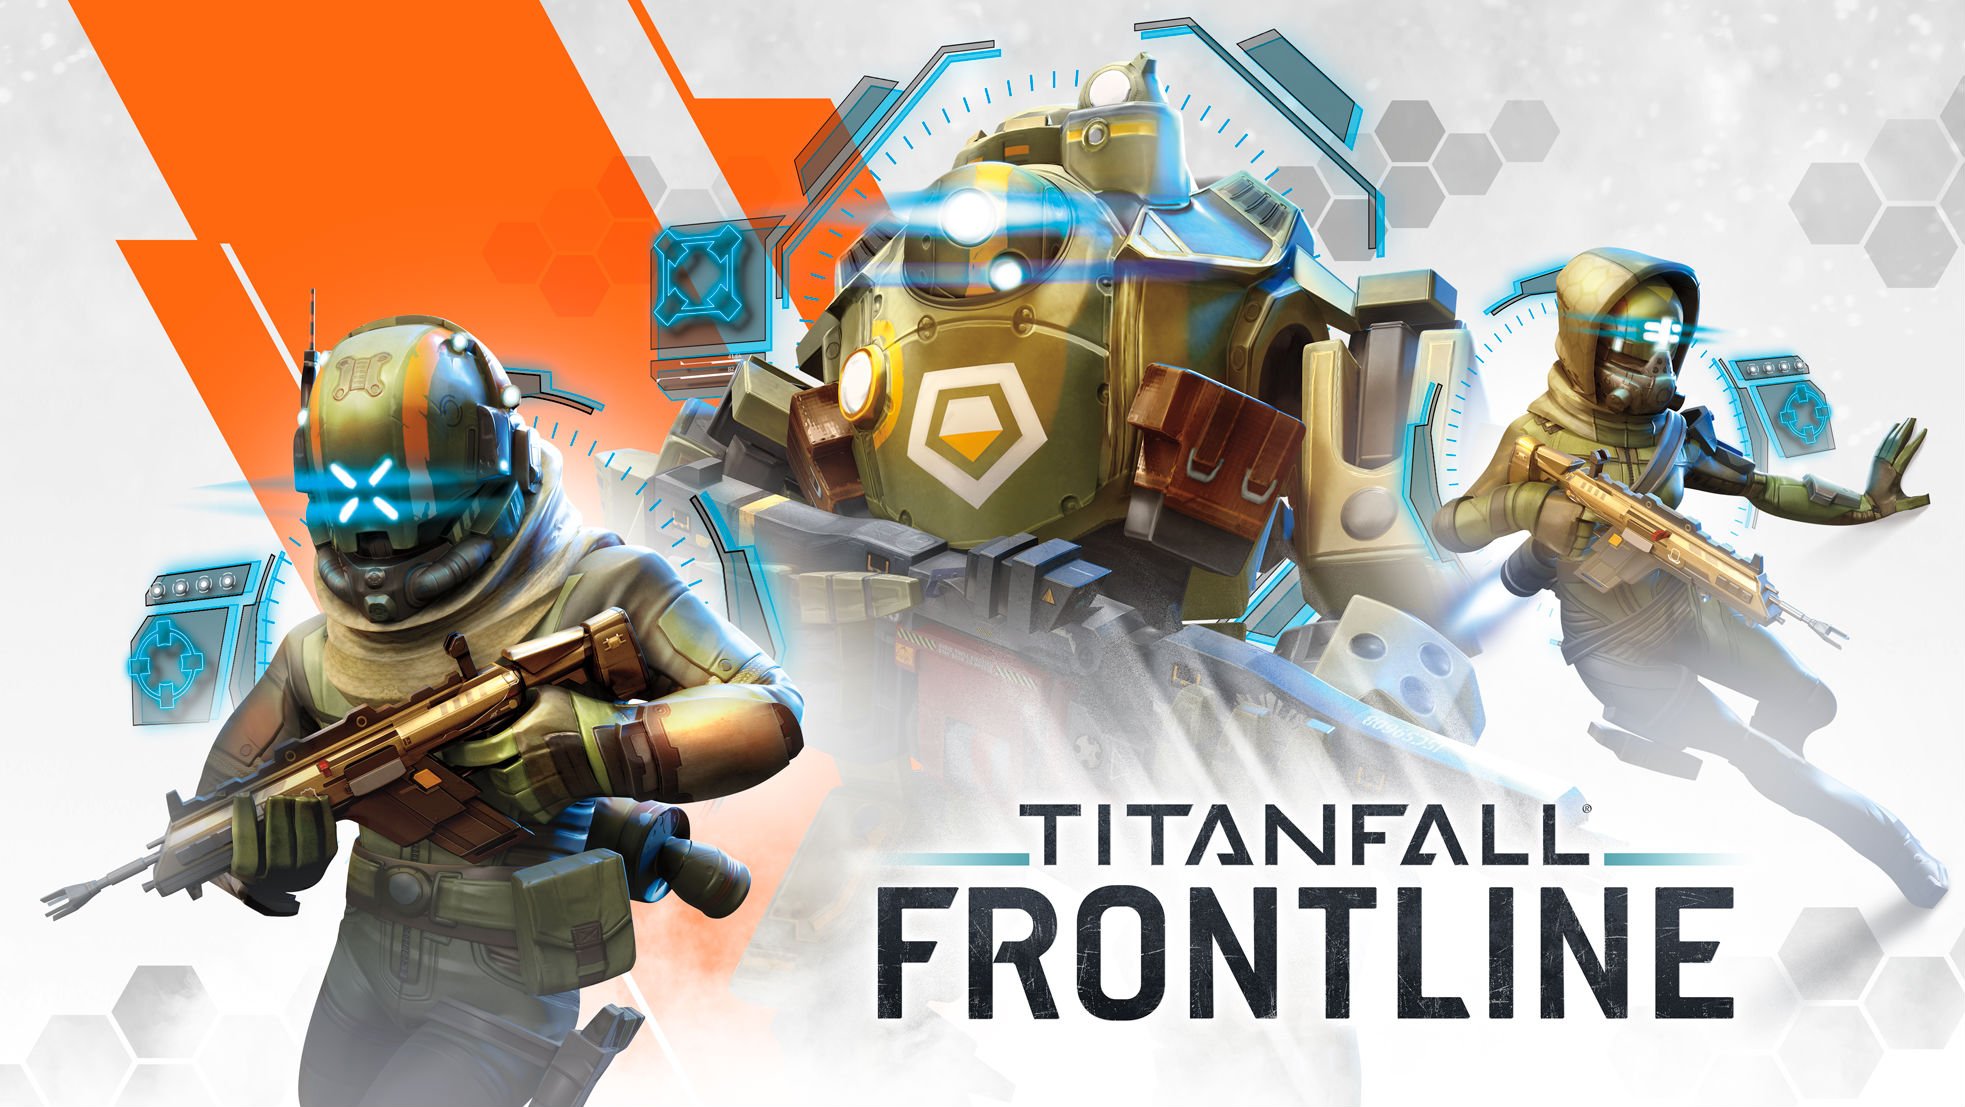 Titanfall: Frontline is the Titanfall Card Game You Didn’t Know You Wanted